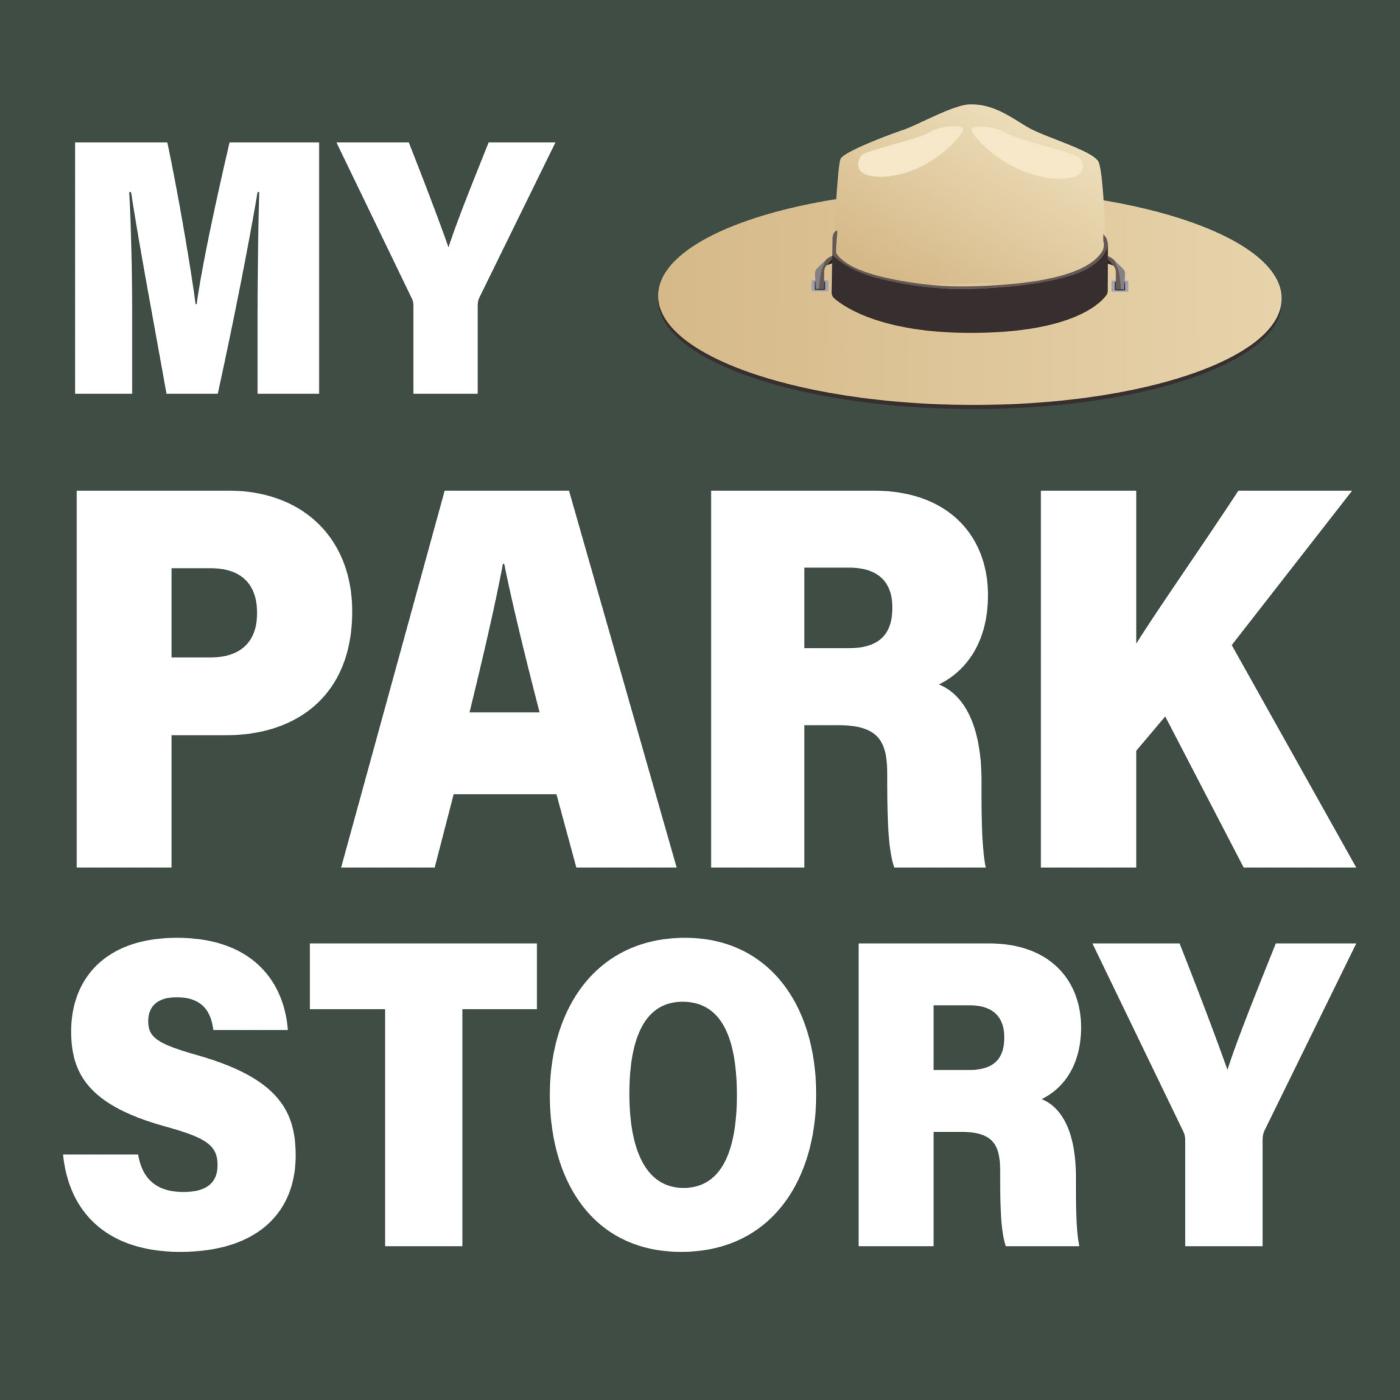 Green background with My Park Story in large, white text and a beige ranger hat in top right corner.